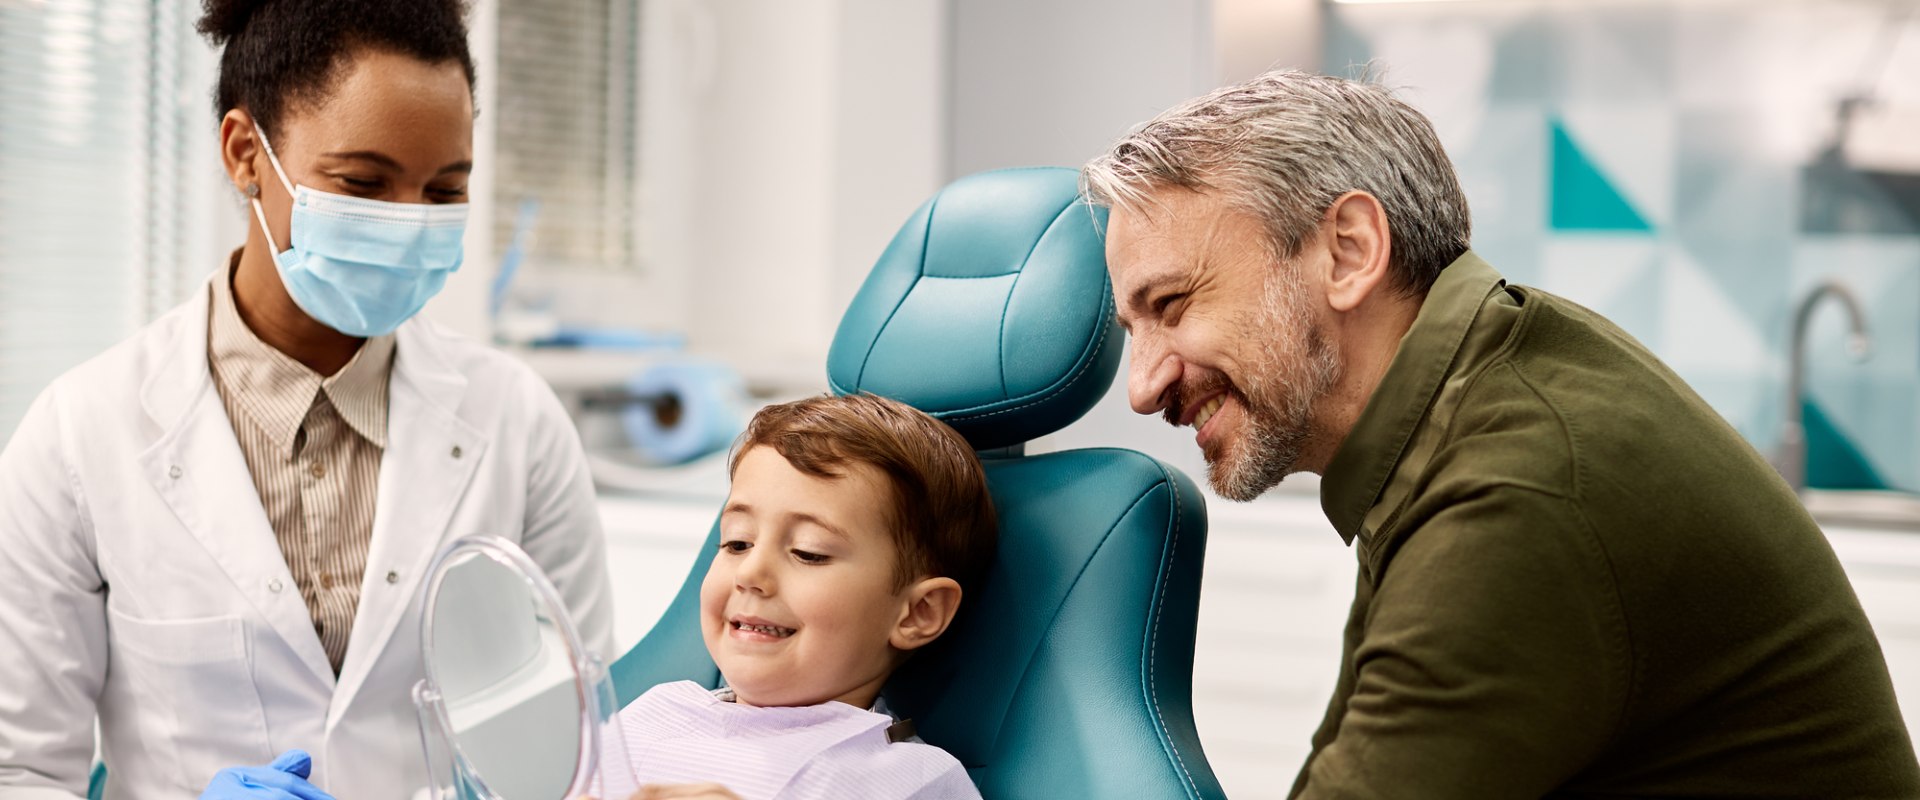 At what age would a person most likely stop seeking a pediatric dentist?